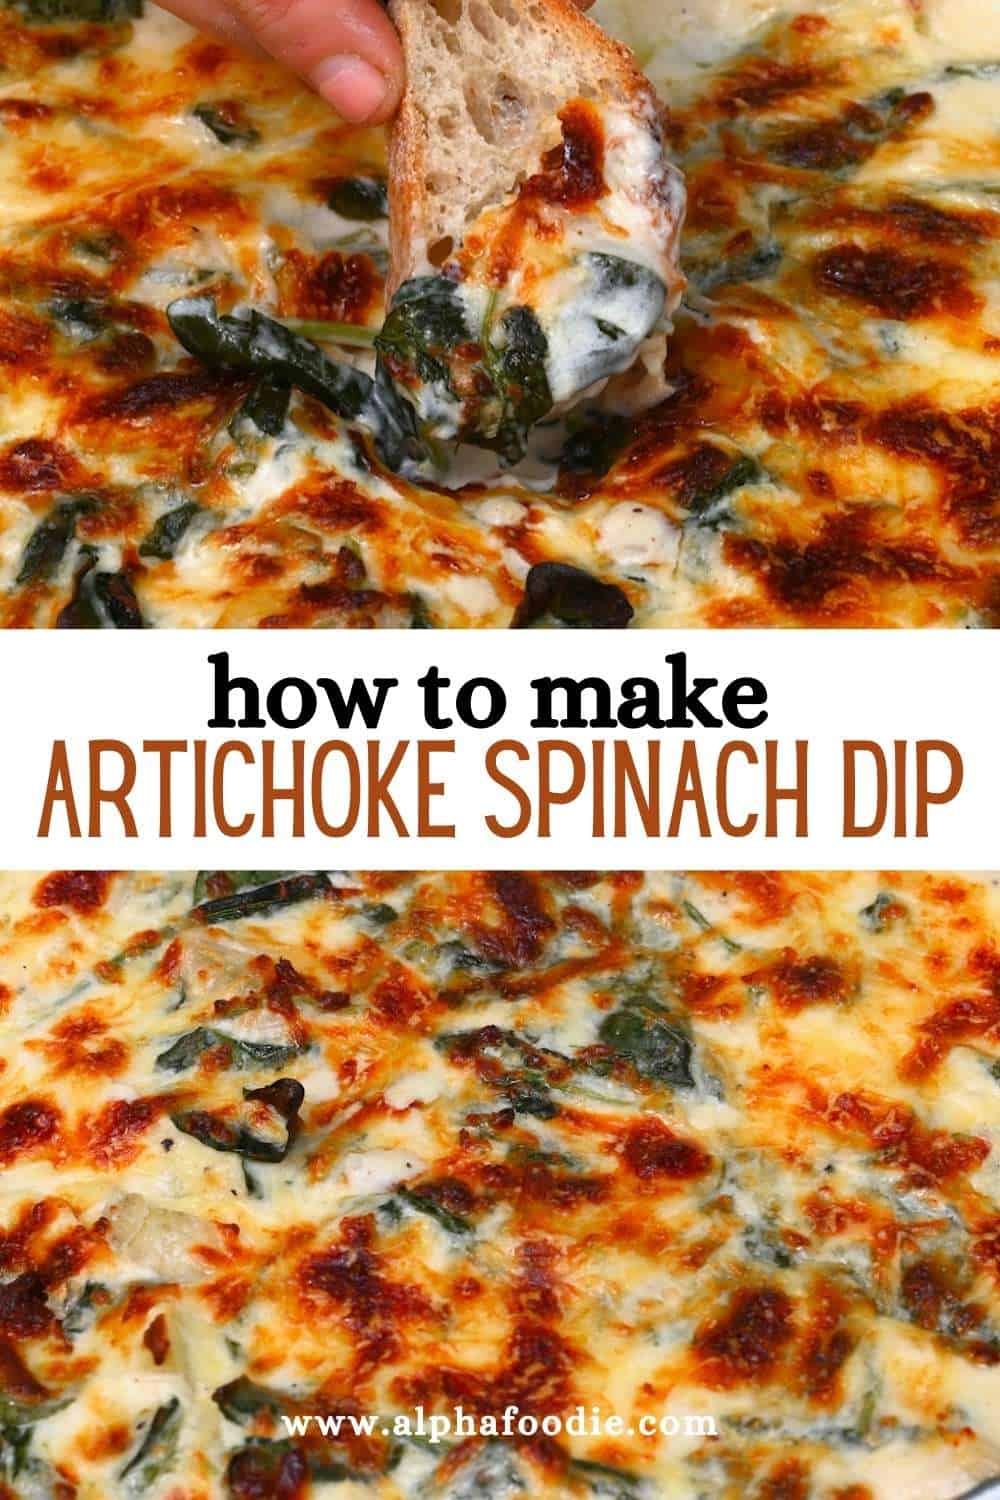 Baked Spinach Artichoke Dip (Without Mayo) - Alphafoodie